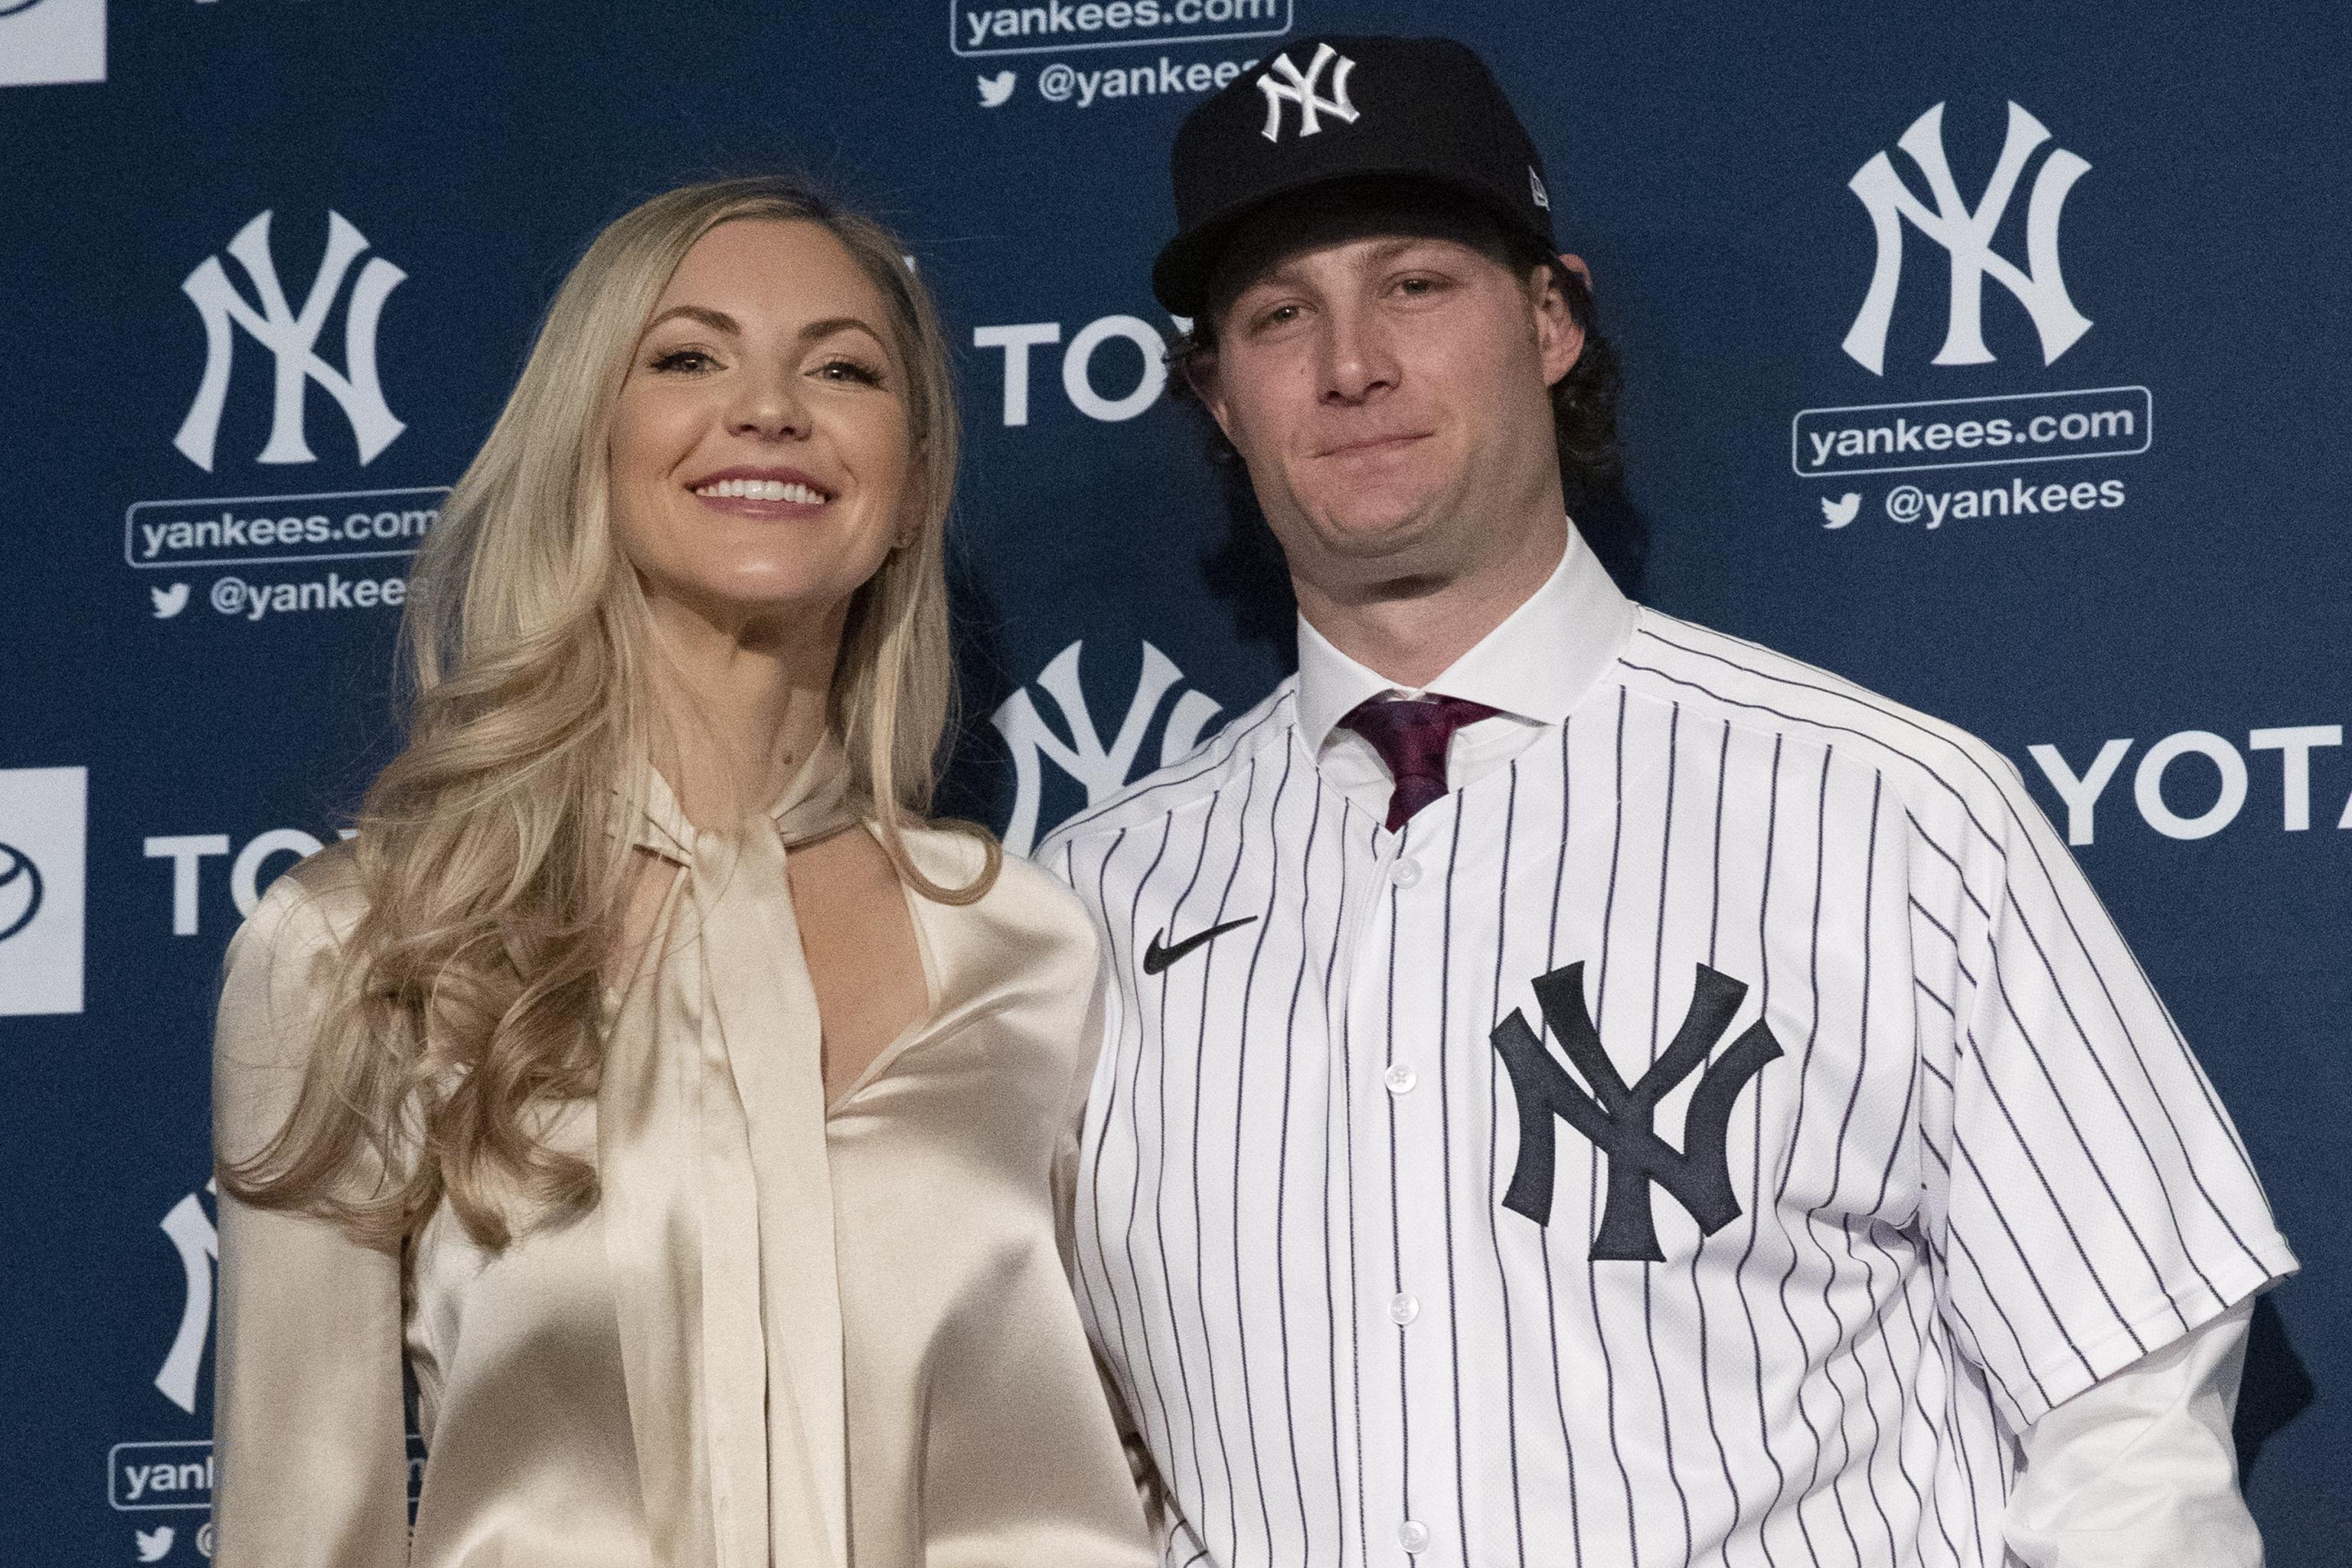 Our littlest Cole is sliding into our home soon! - New York Yankees ace Gerrit  Cole and wife Amy Crawford announce their second baby is on the way